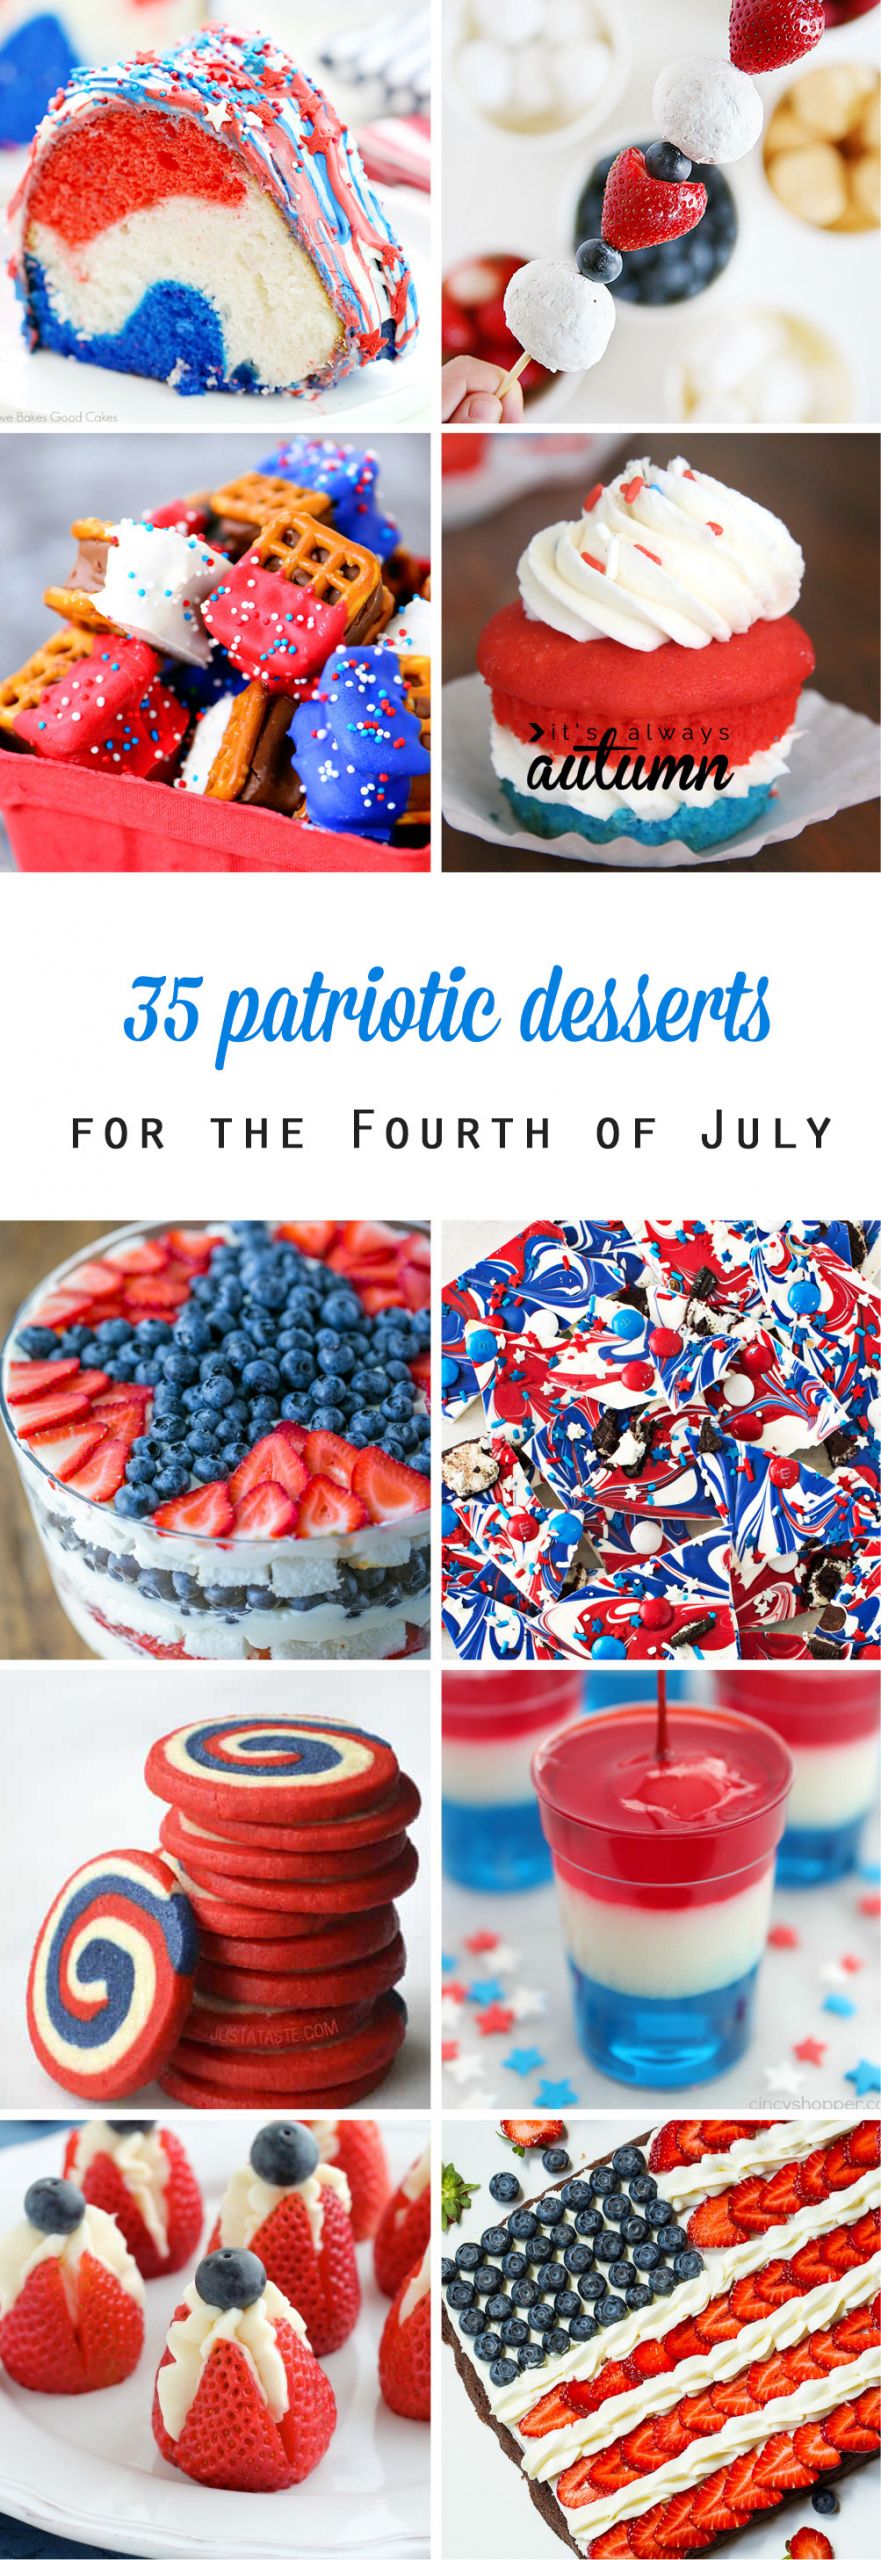 Forth Of July Desserts
 20 red white and blue desserts for the Fourth of July